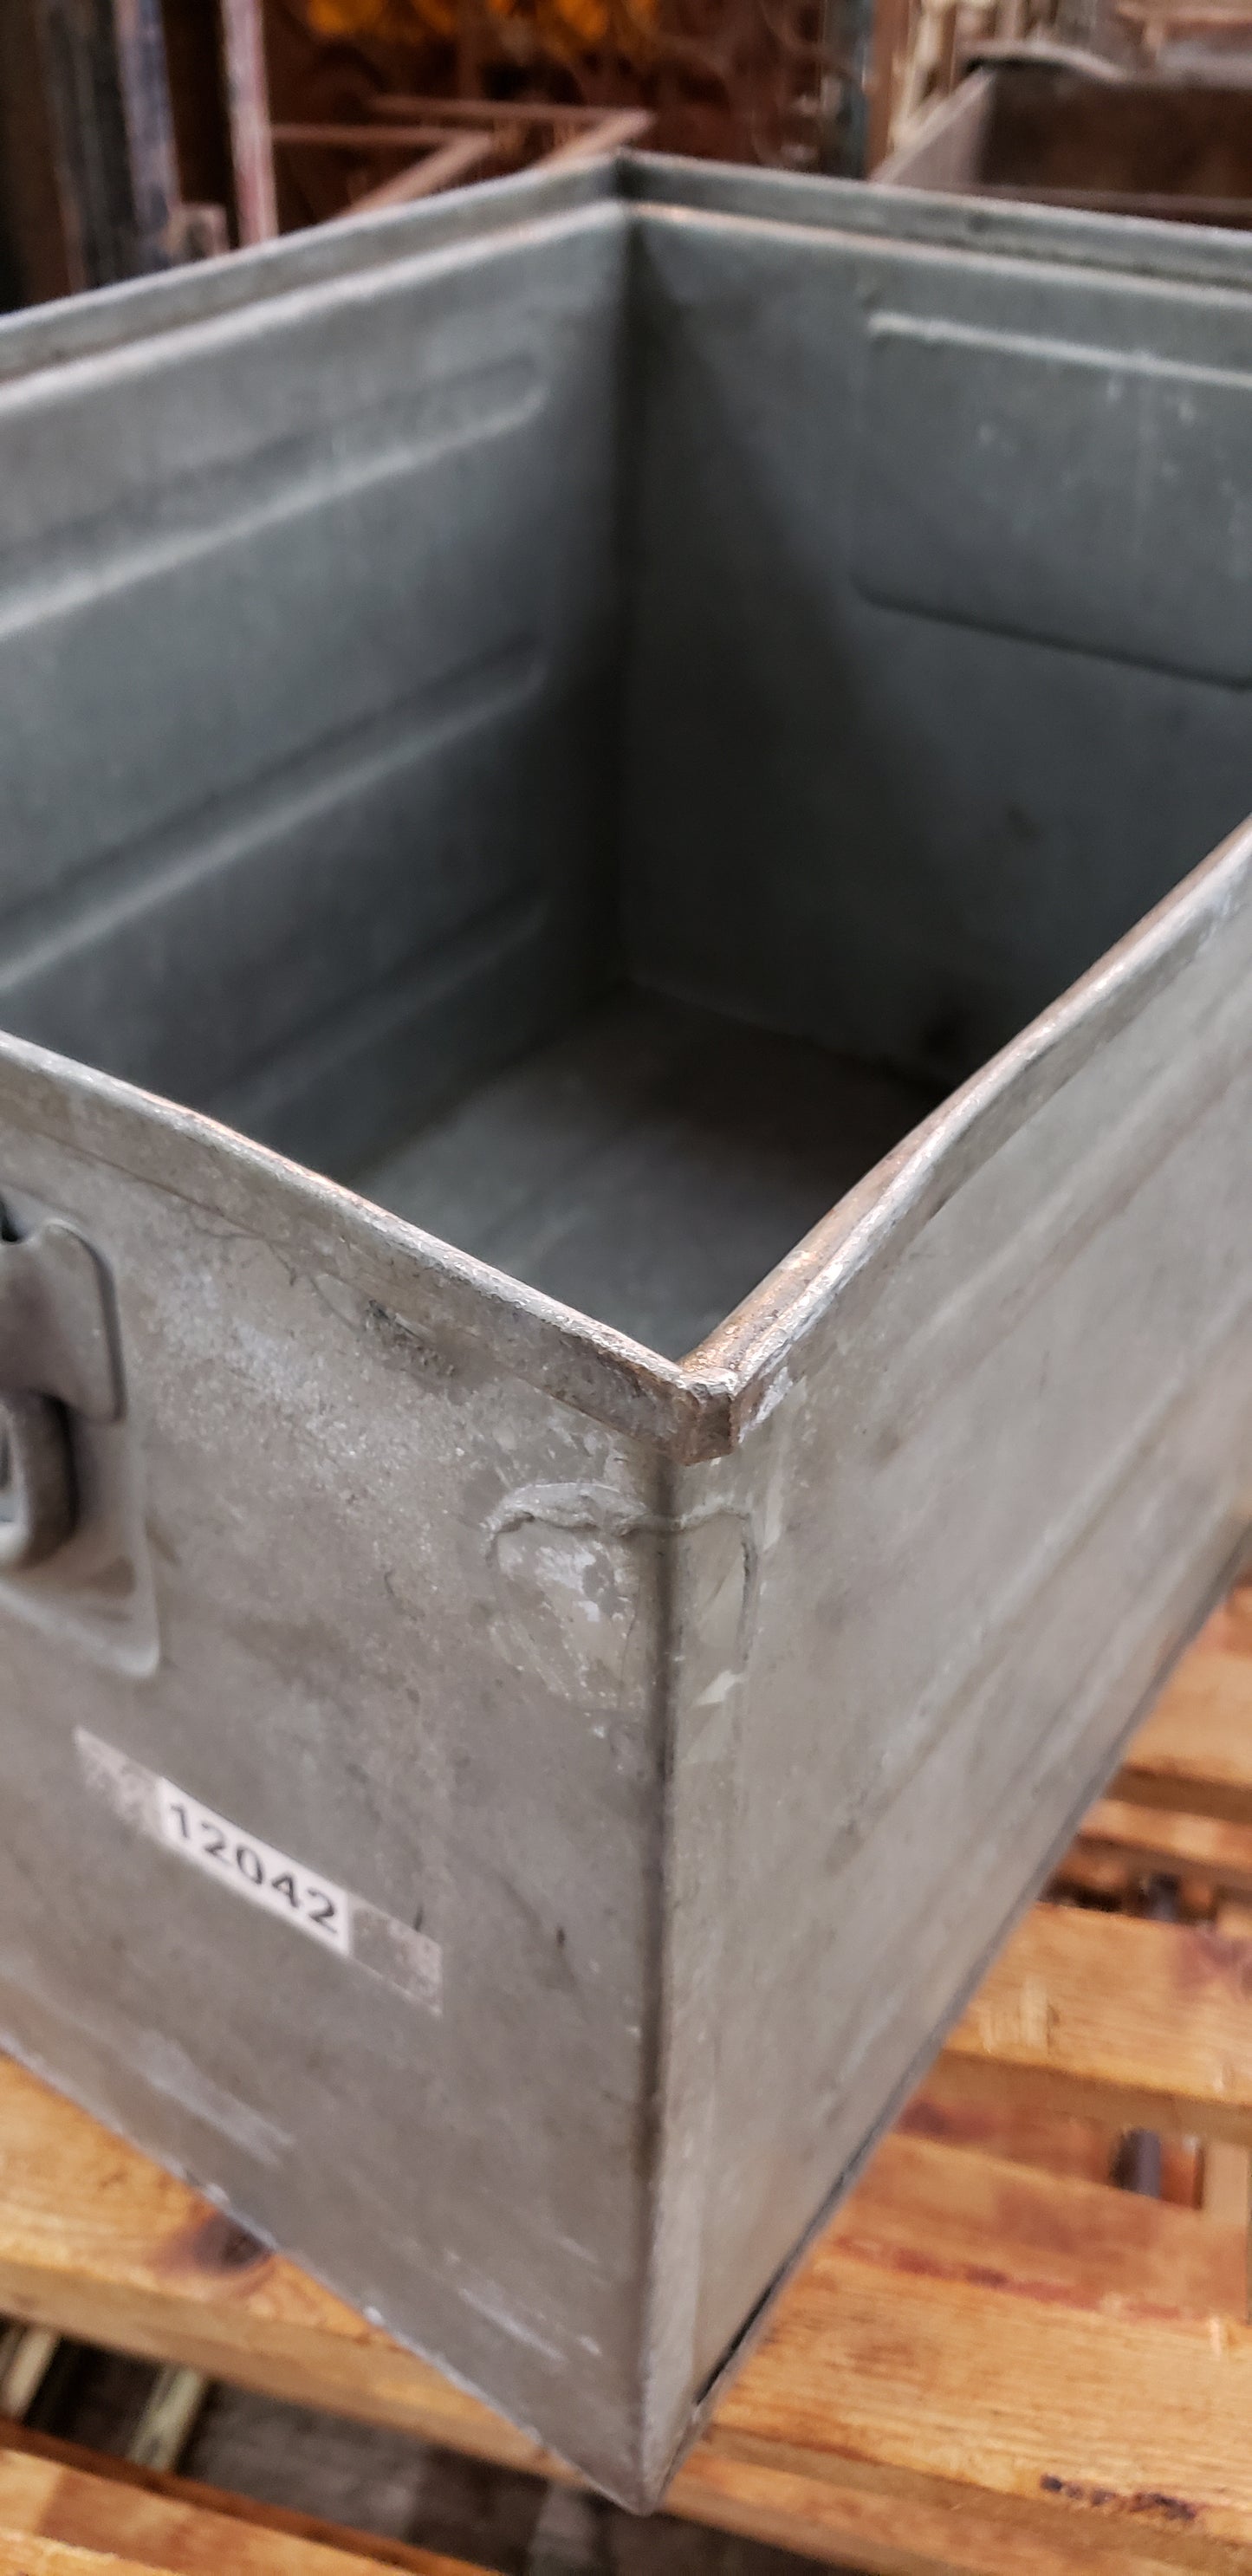 Industrial Iron Crate